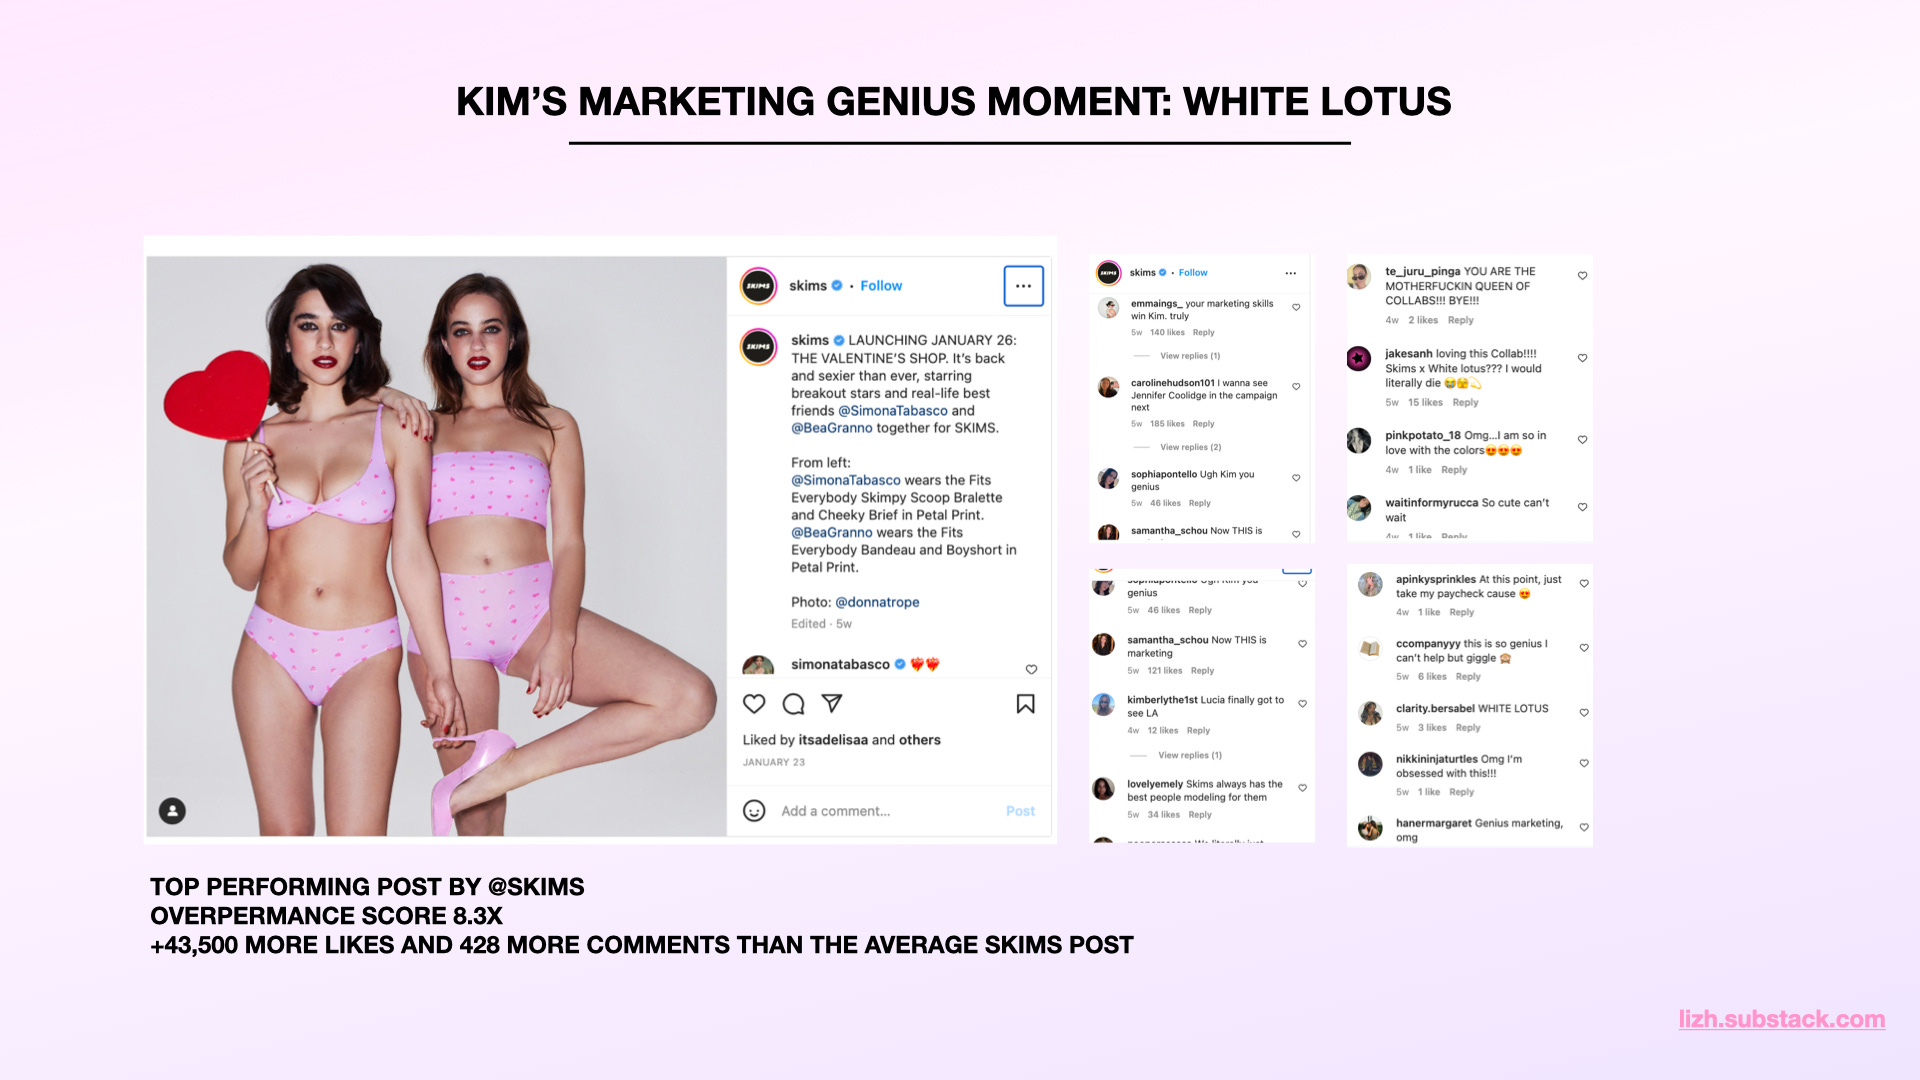 White Lotus' Stars In SKIMS Valentines Day Campaign: Photos